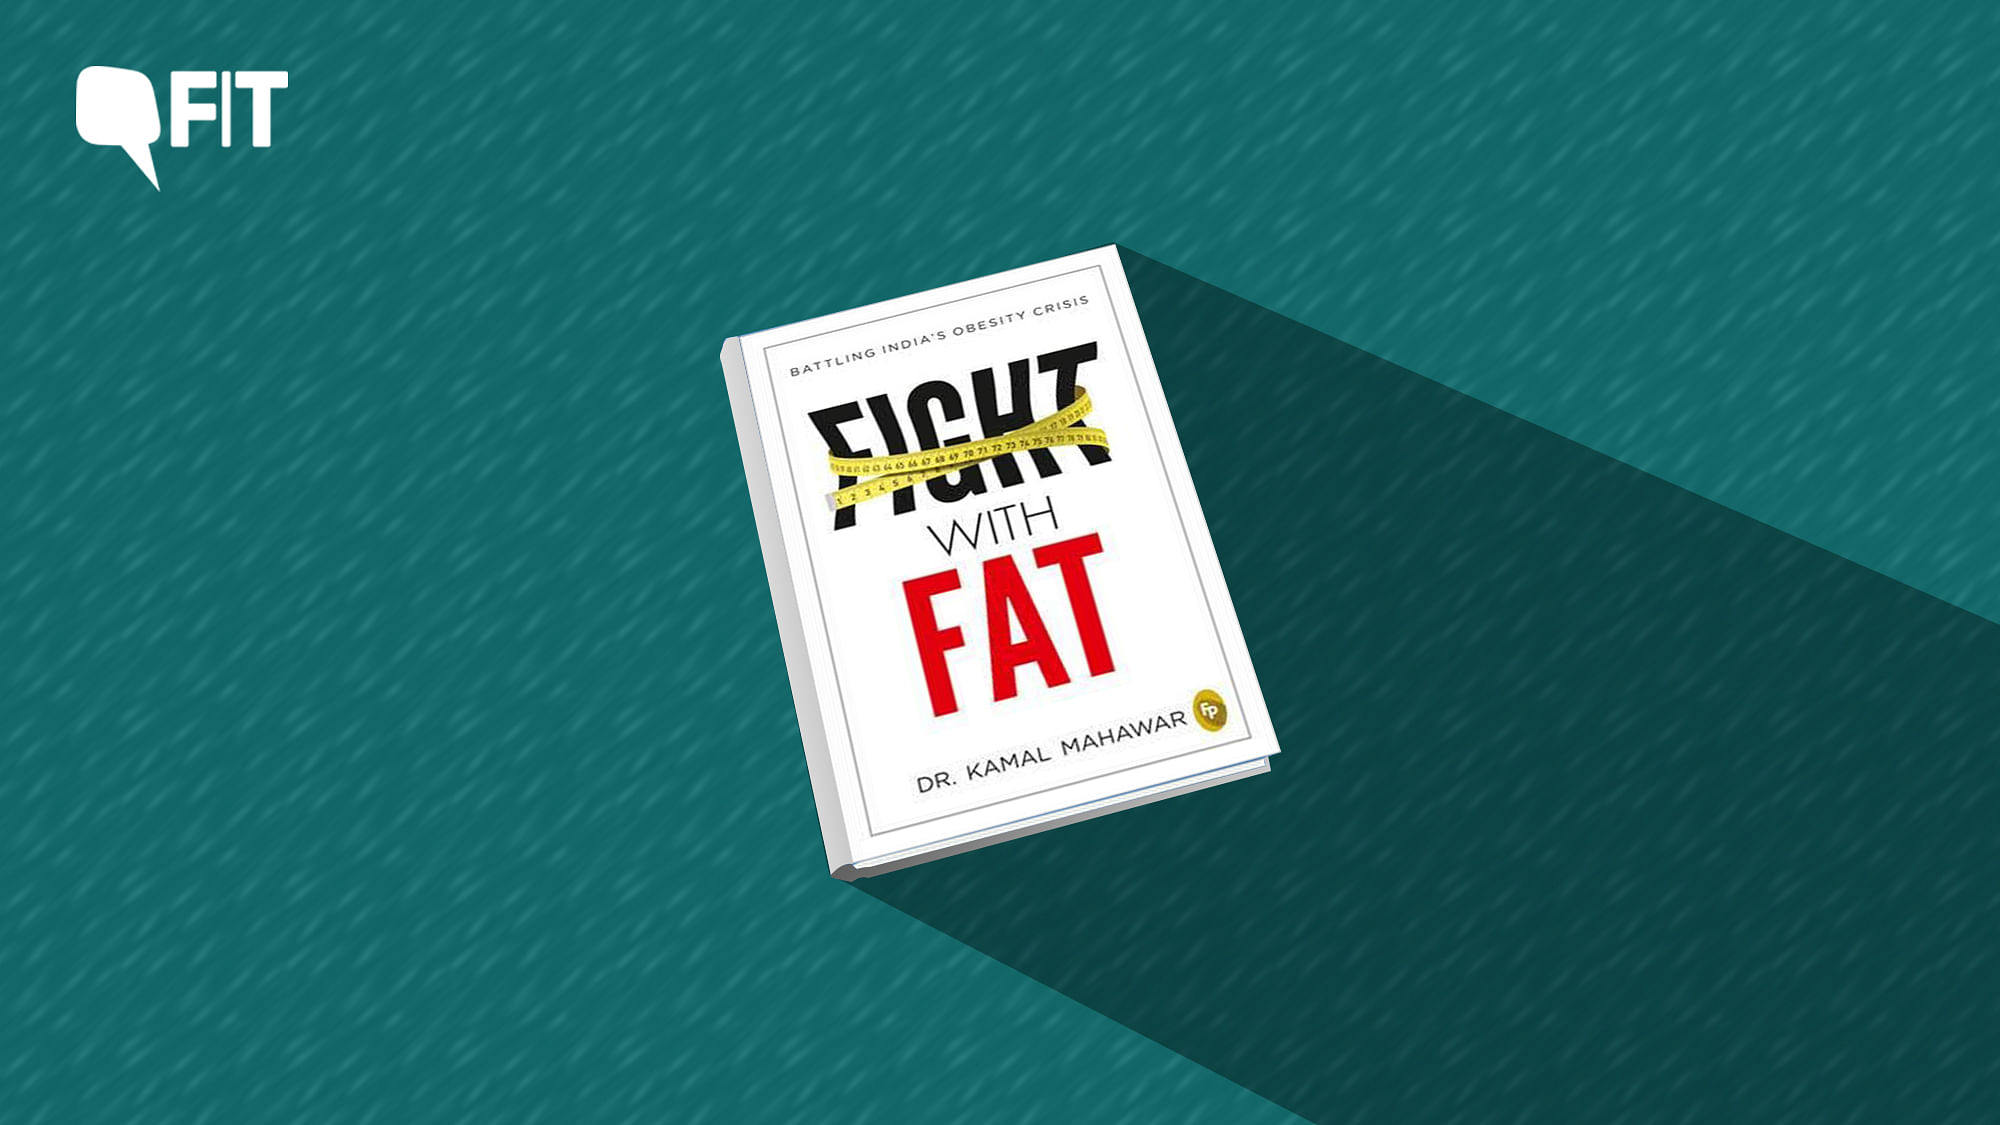 ‘Fight with Fat’ By Dr Kamal Mahawar